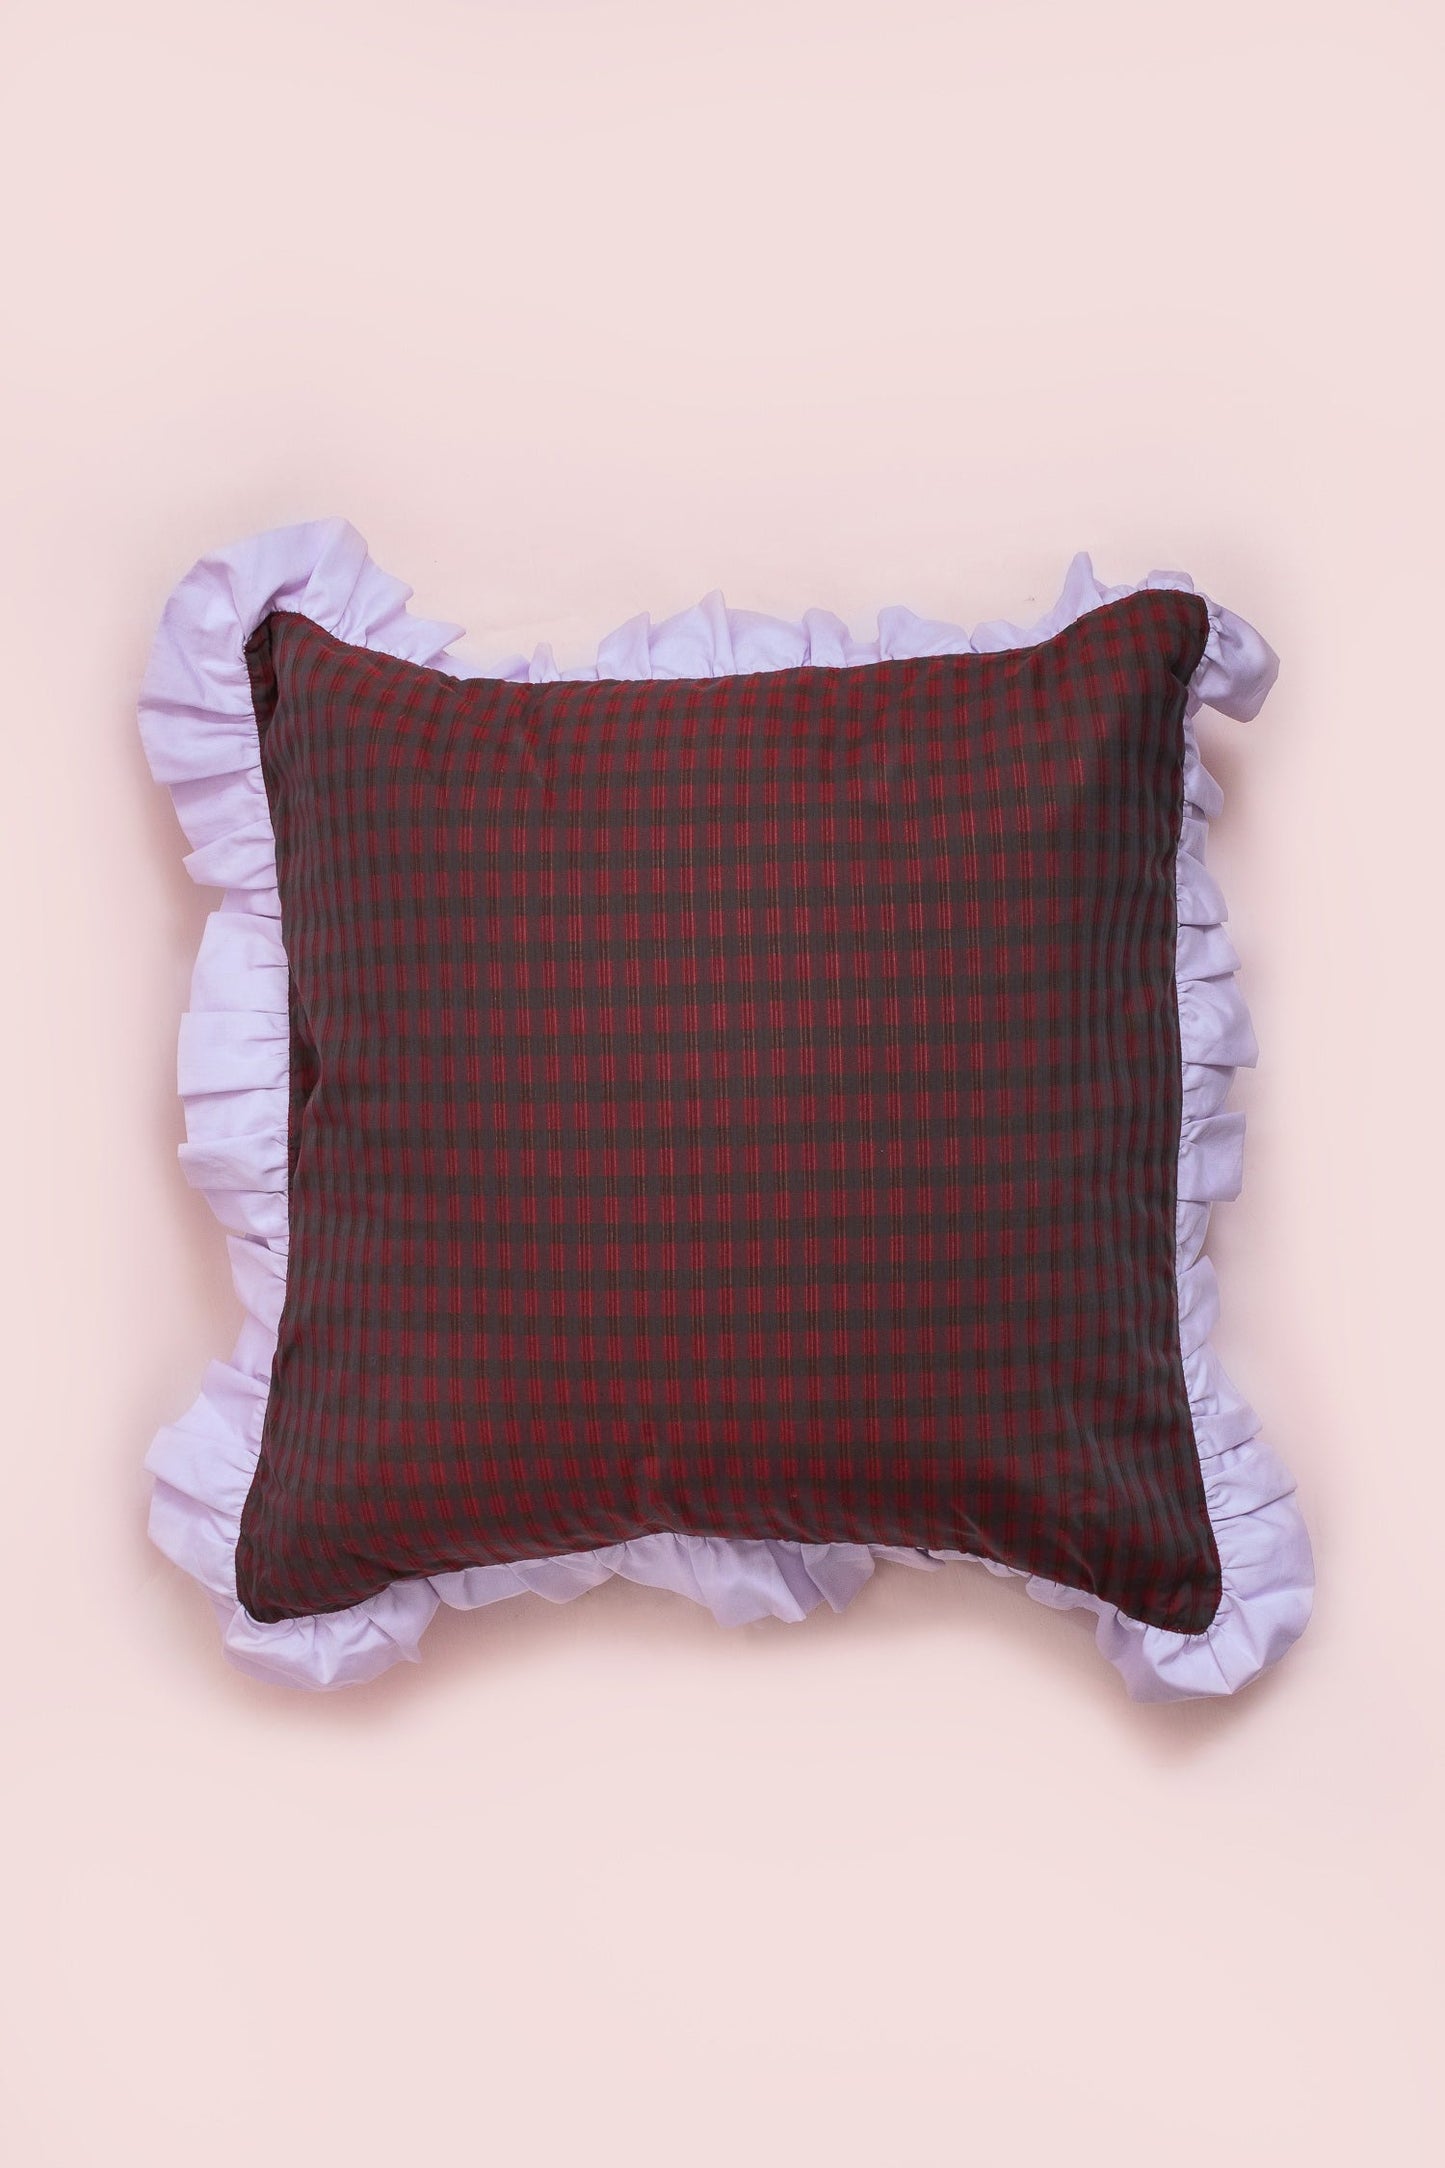 Ruffle cushion, made in red check deadstock cotton with lilac ruffle edges. Cut zero waste